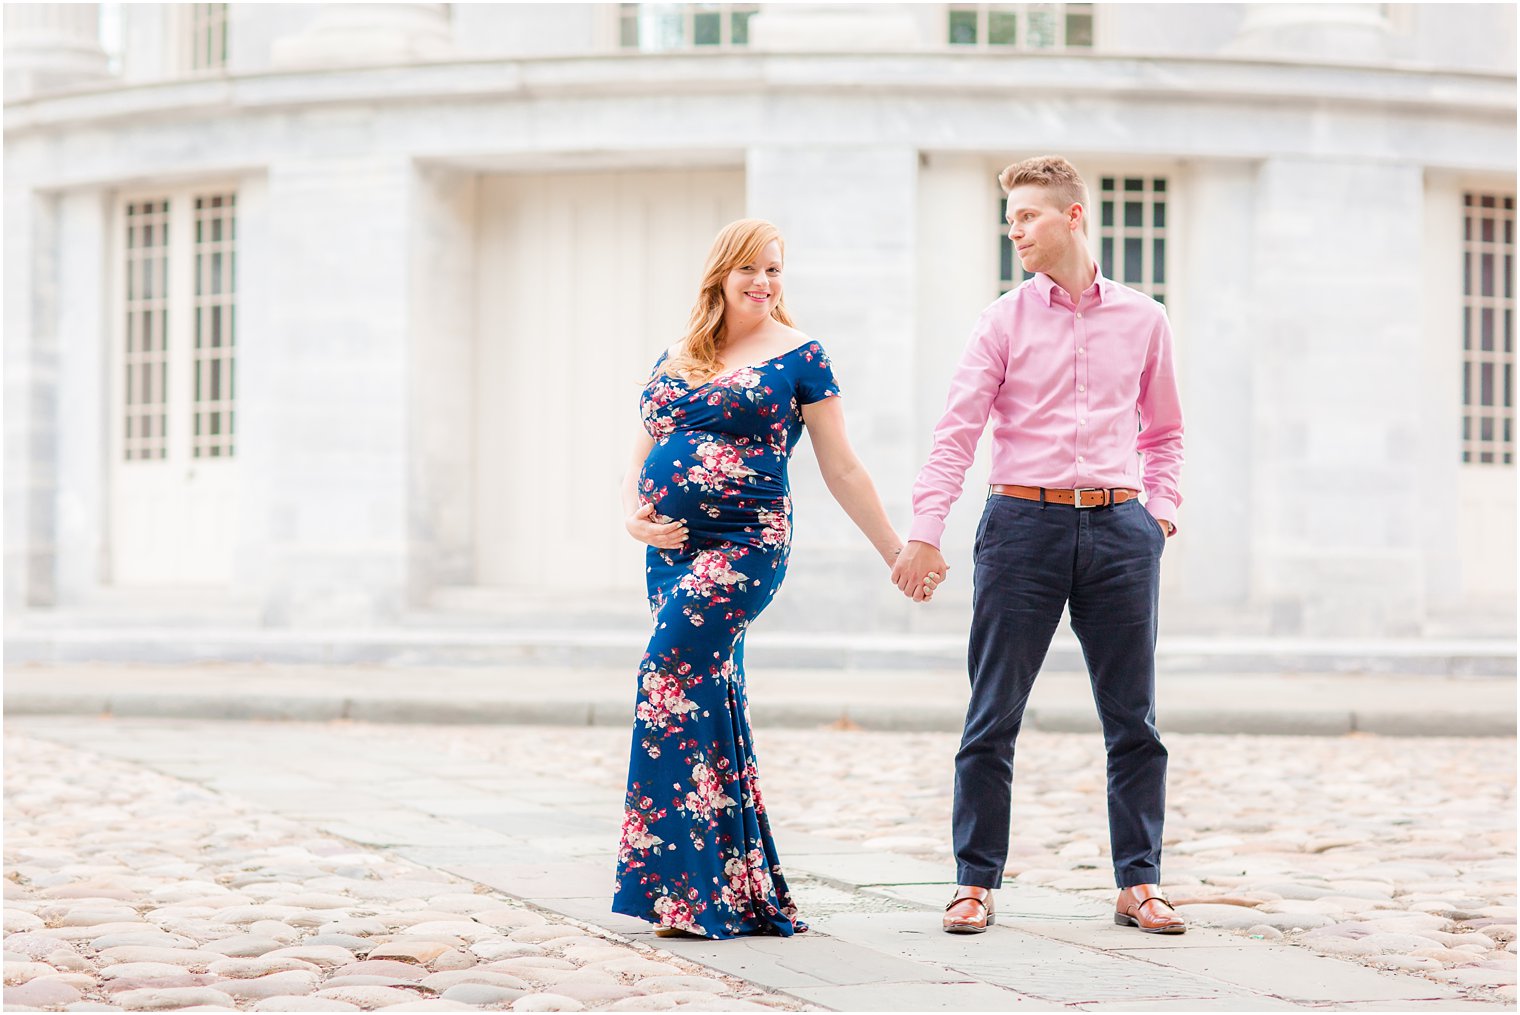 Beautiful maternity session in Philly